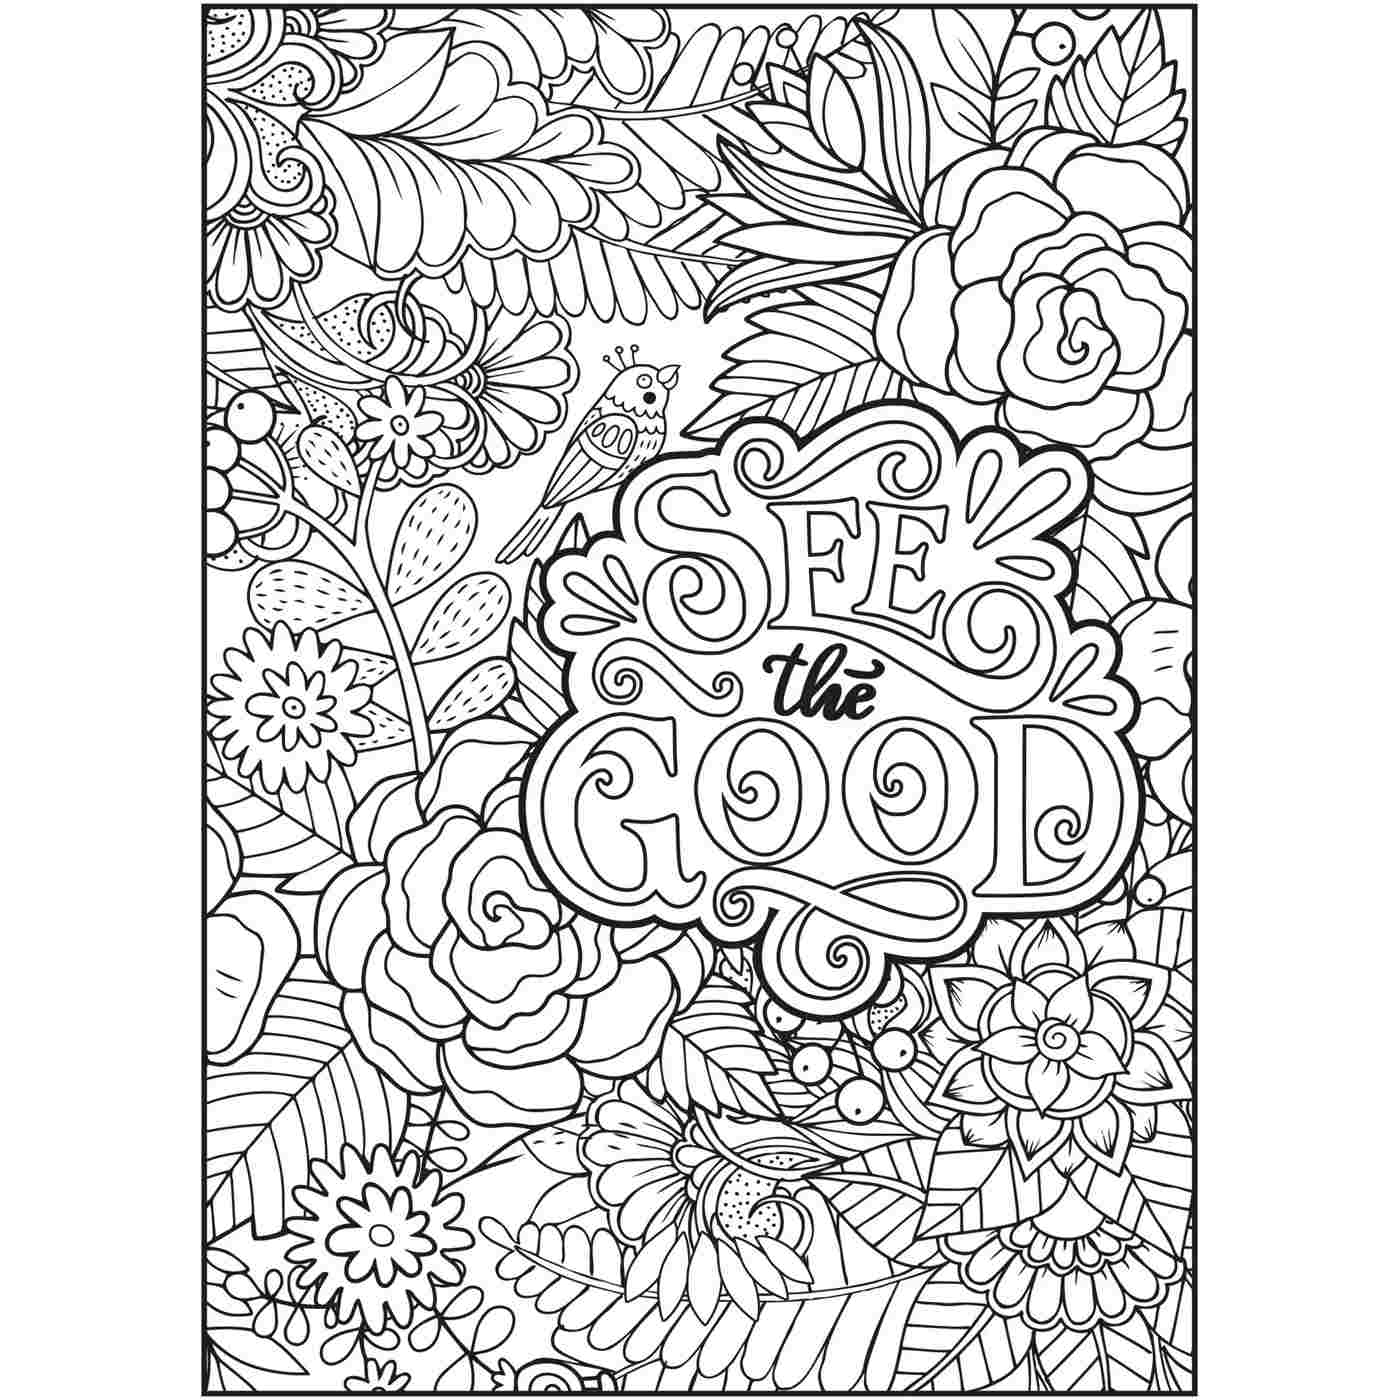 Cra-Z-Art Timeless Creations Words of Wonder Coloring Book; image 4 of 5